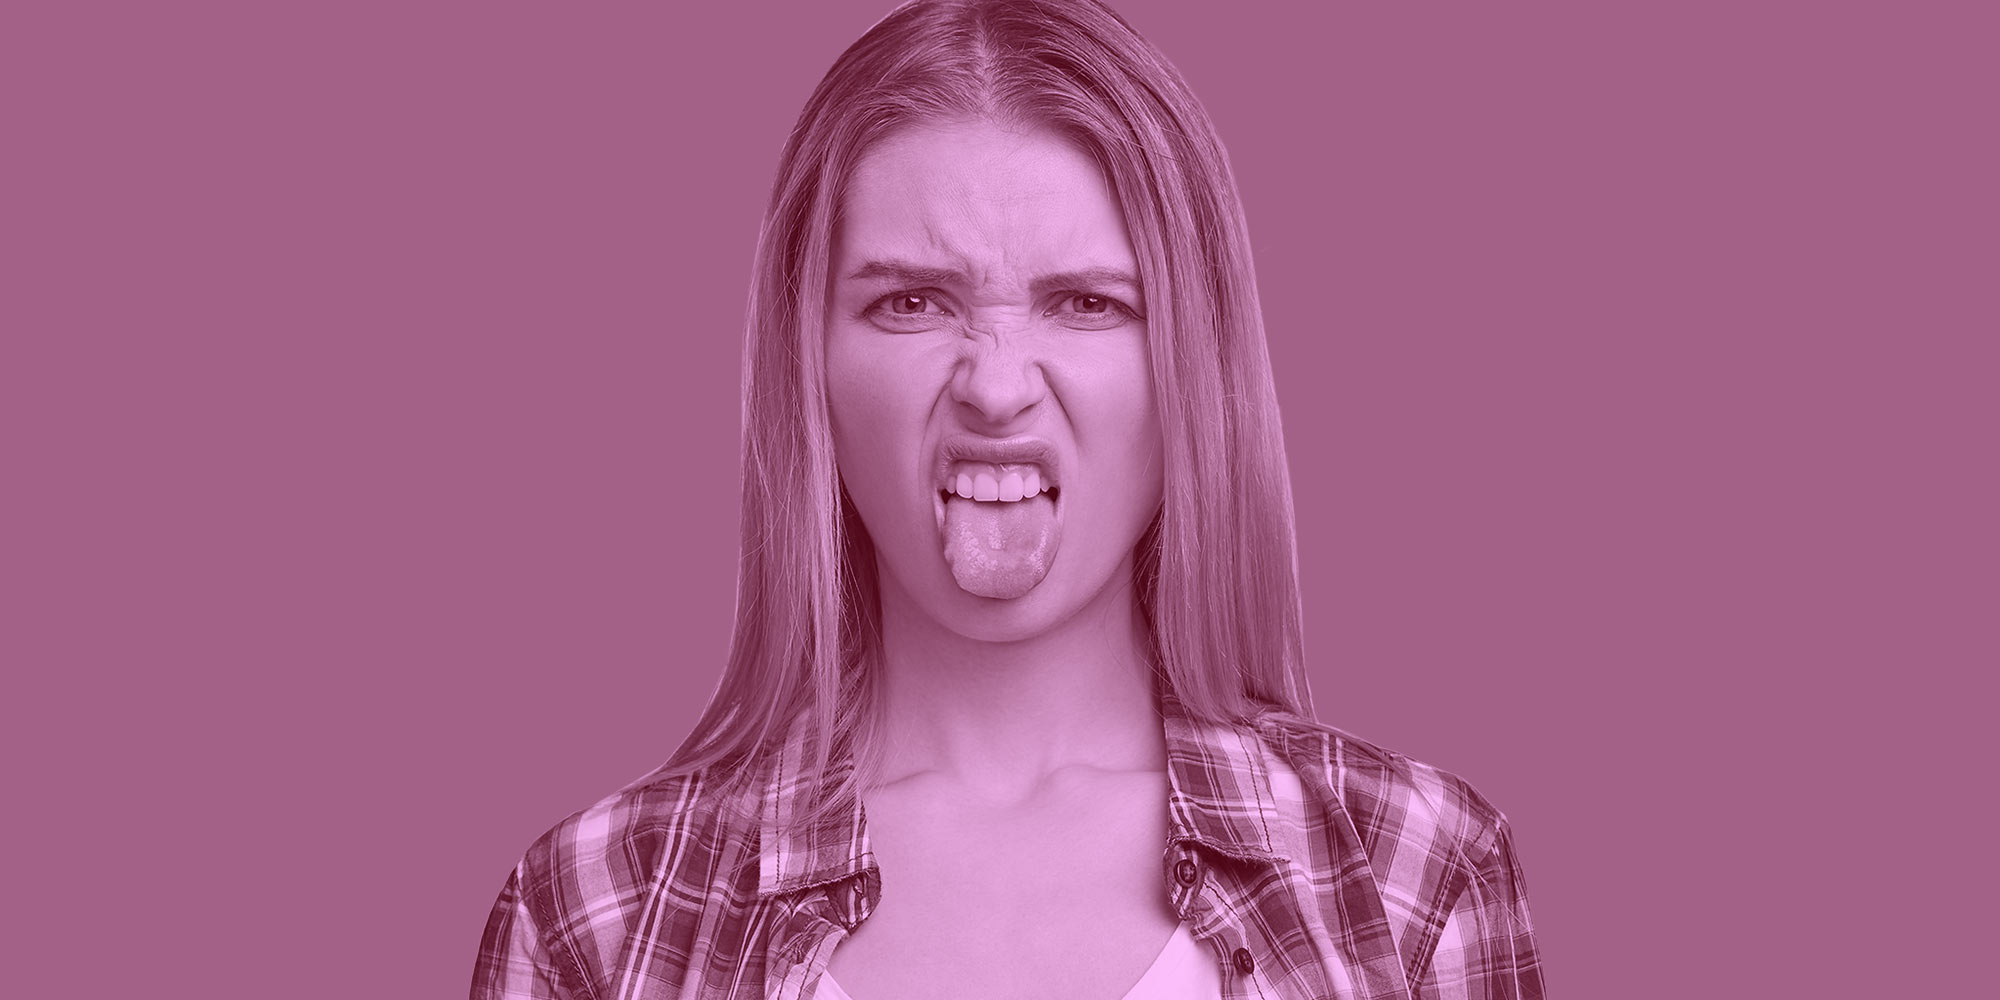 Woman making a disgusted face with her tongue sticking out. Suboxone tastes bad.